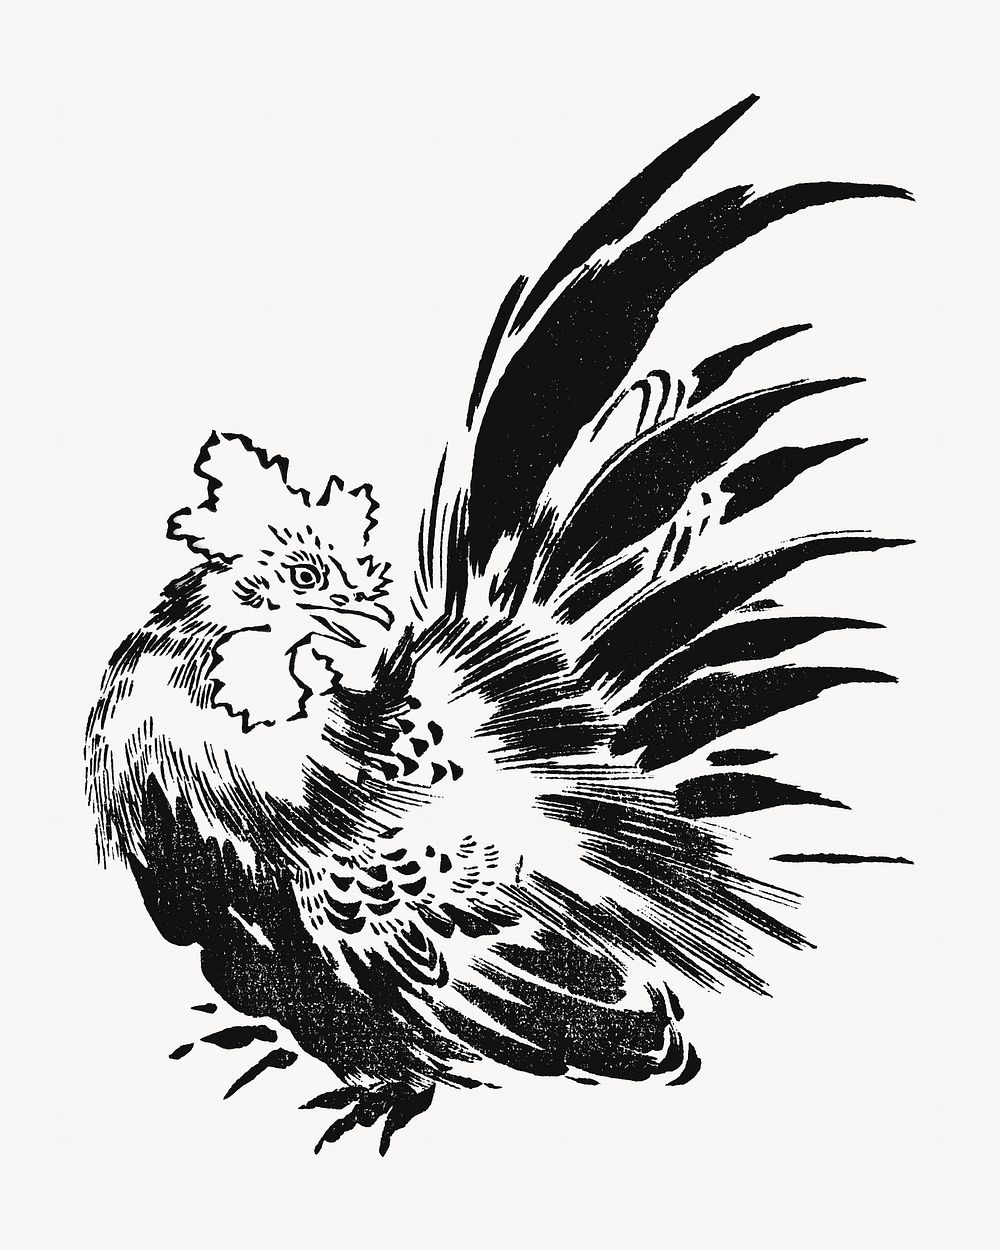 Japanese chicken, ink animal illustration by Toyeki. Remixed by rawpixel.